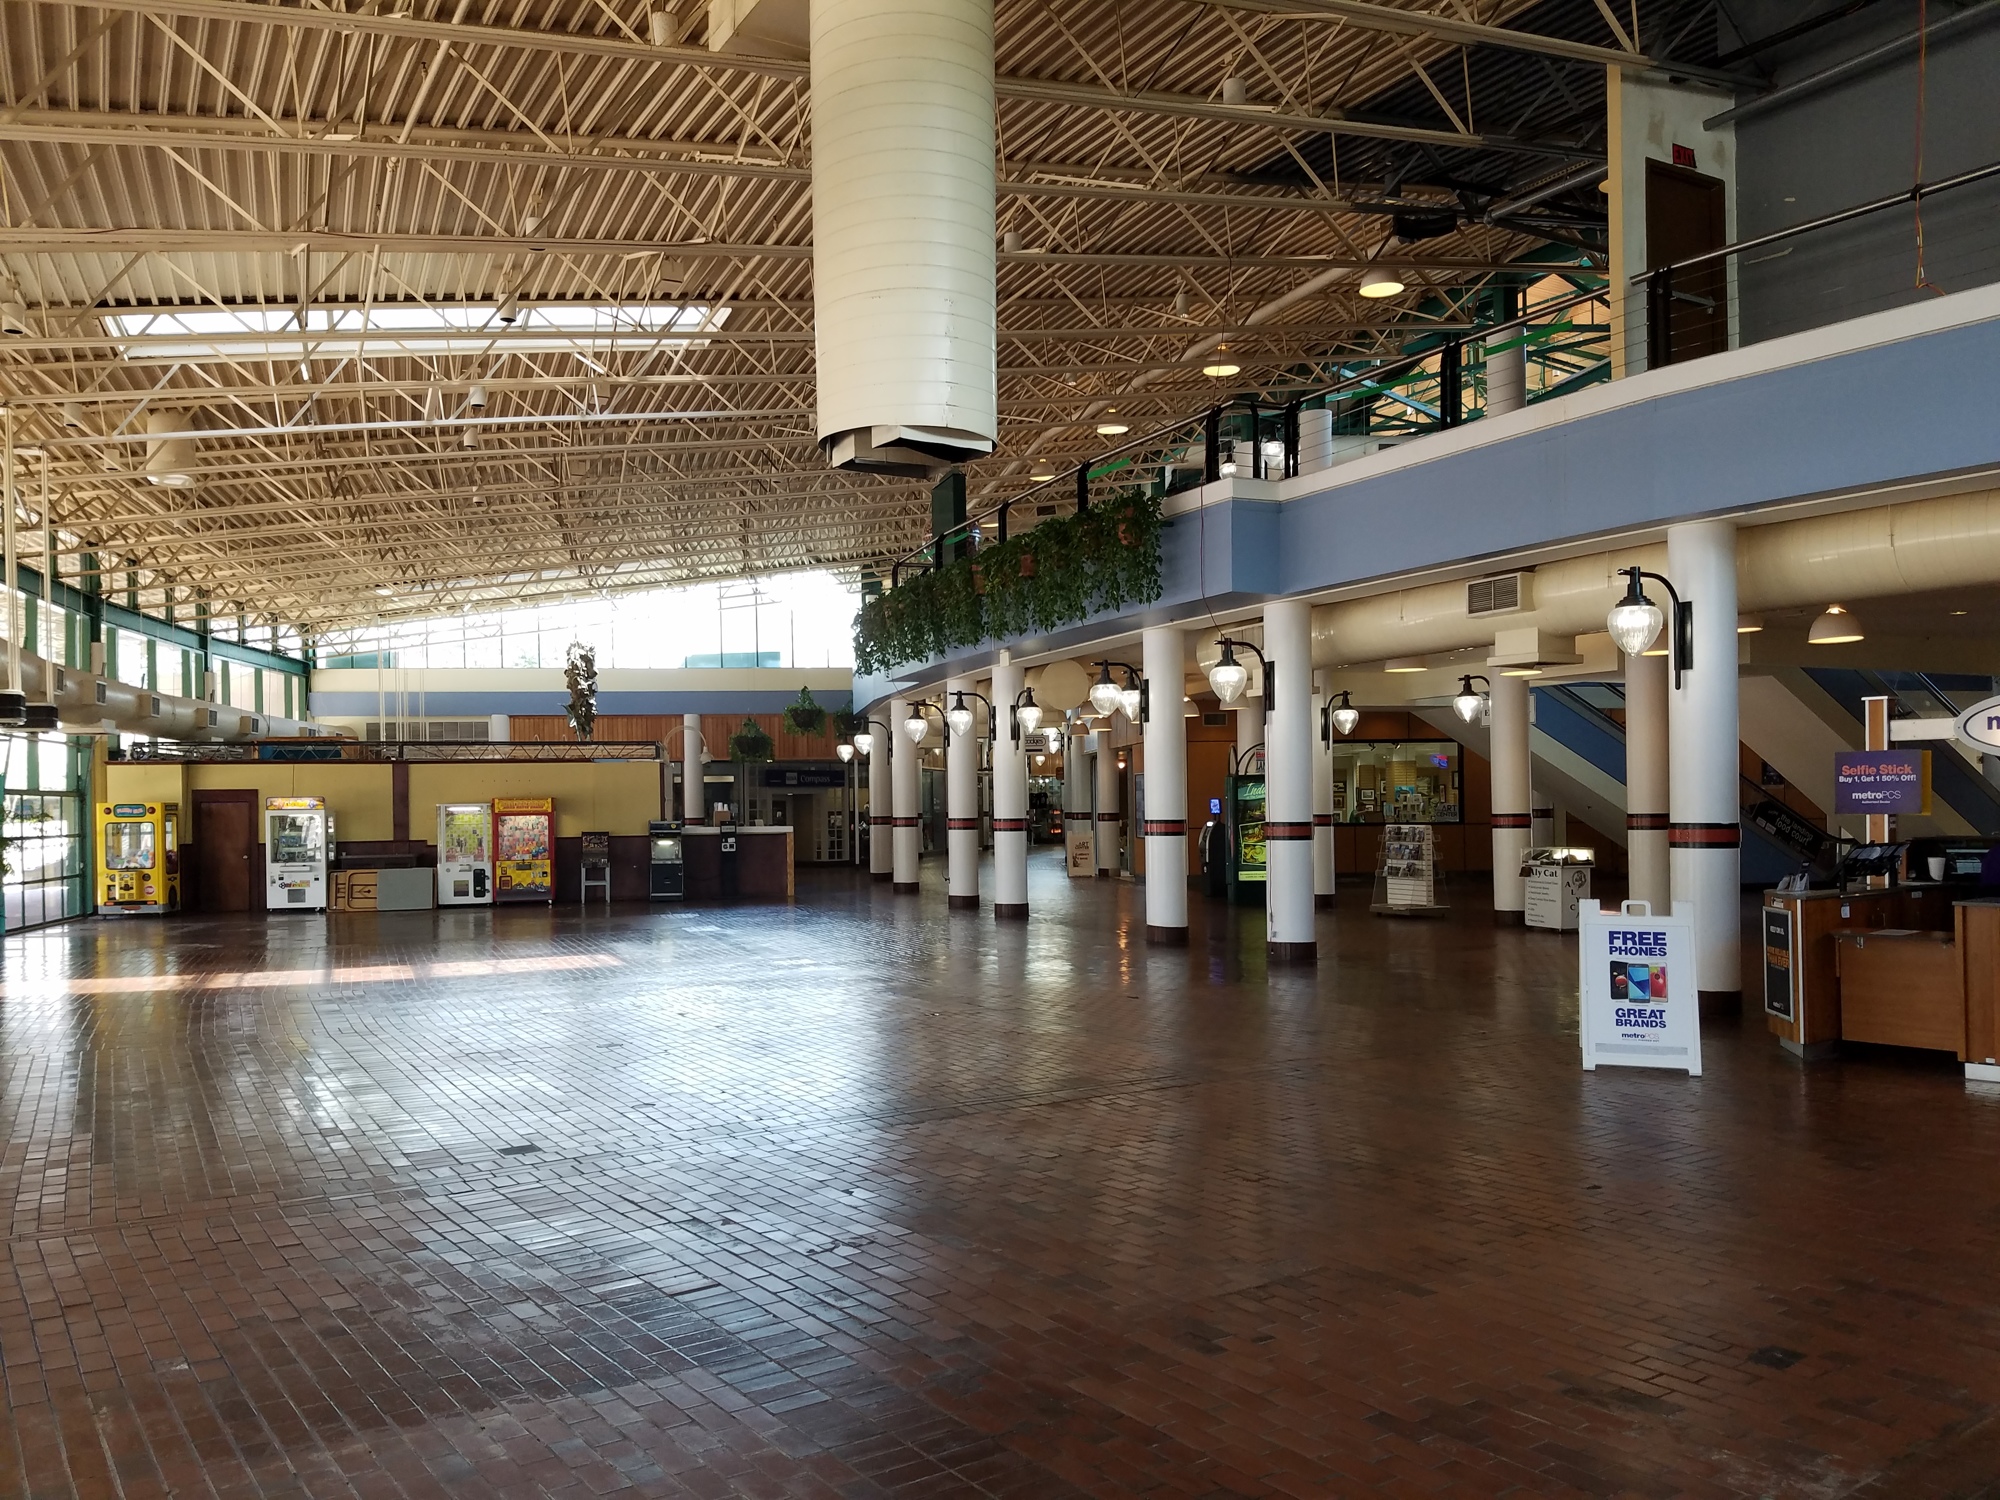 Inside the north entrance to the Jacksonville Landing, the area where Village Bread Cafe once had a restaurant has been cleared.